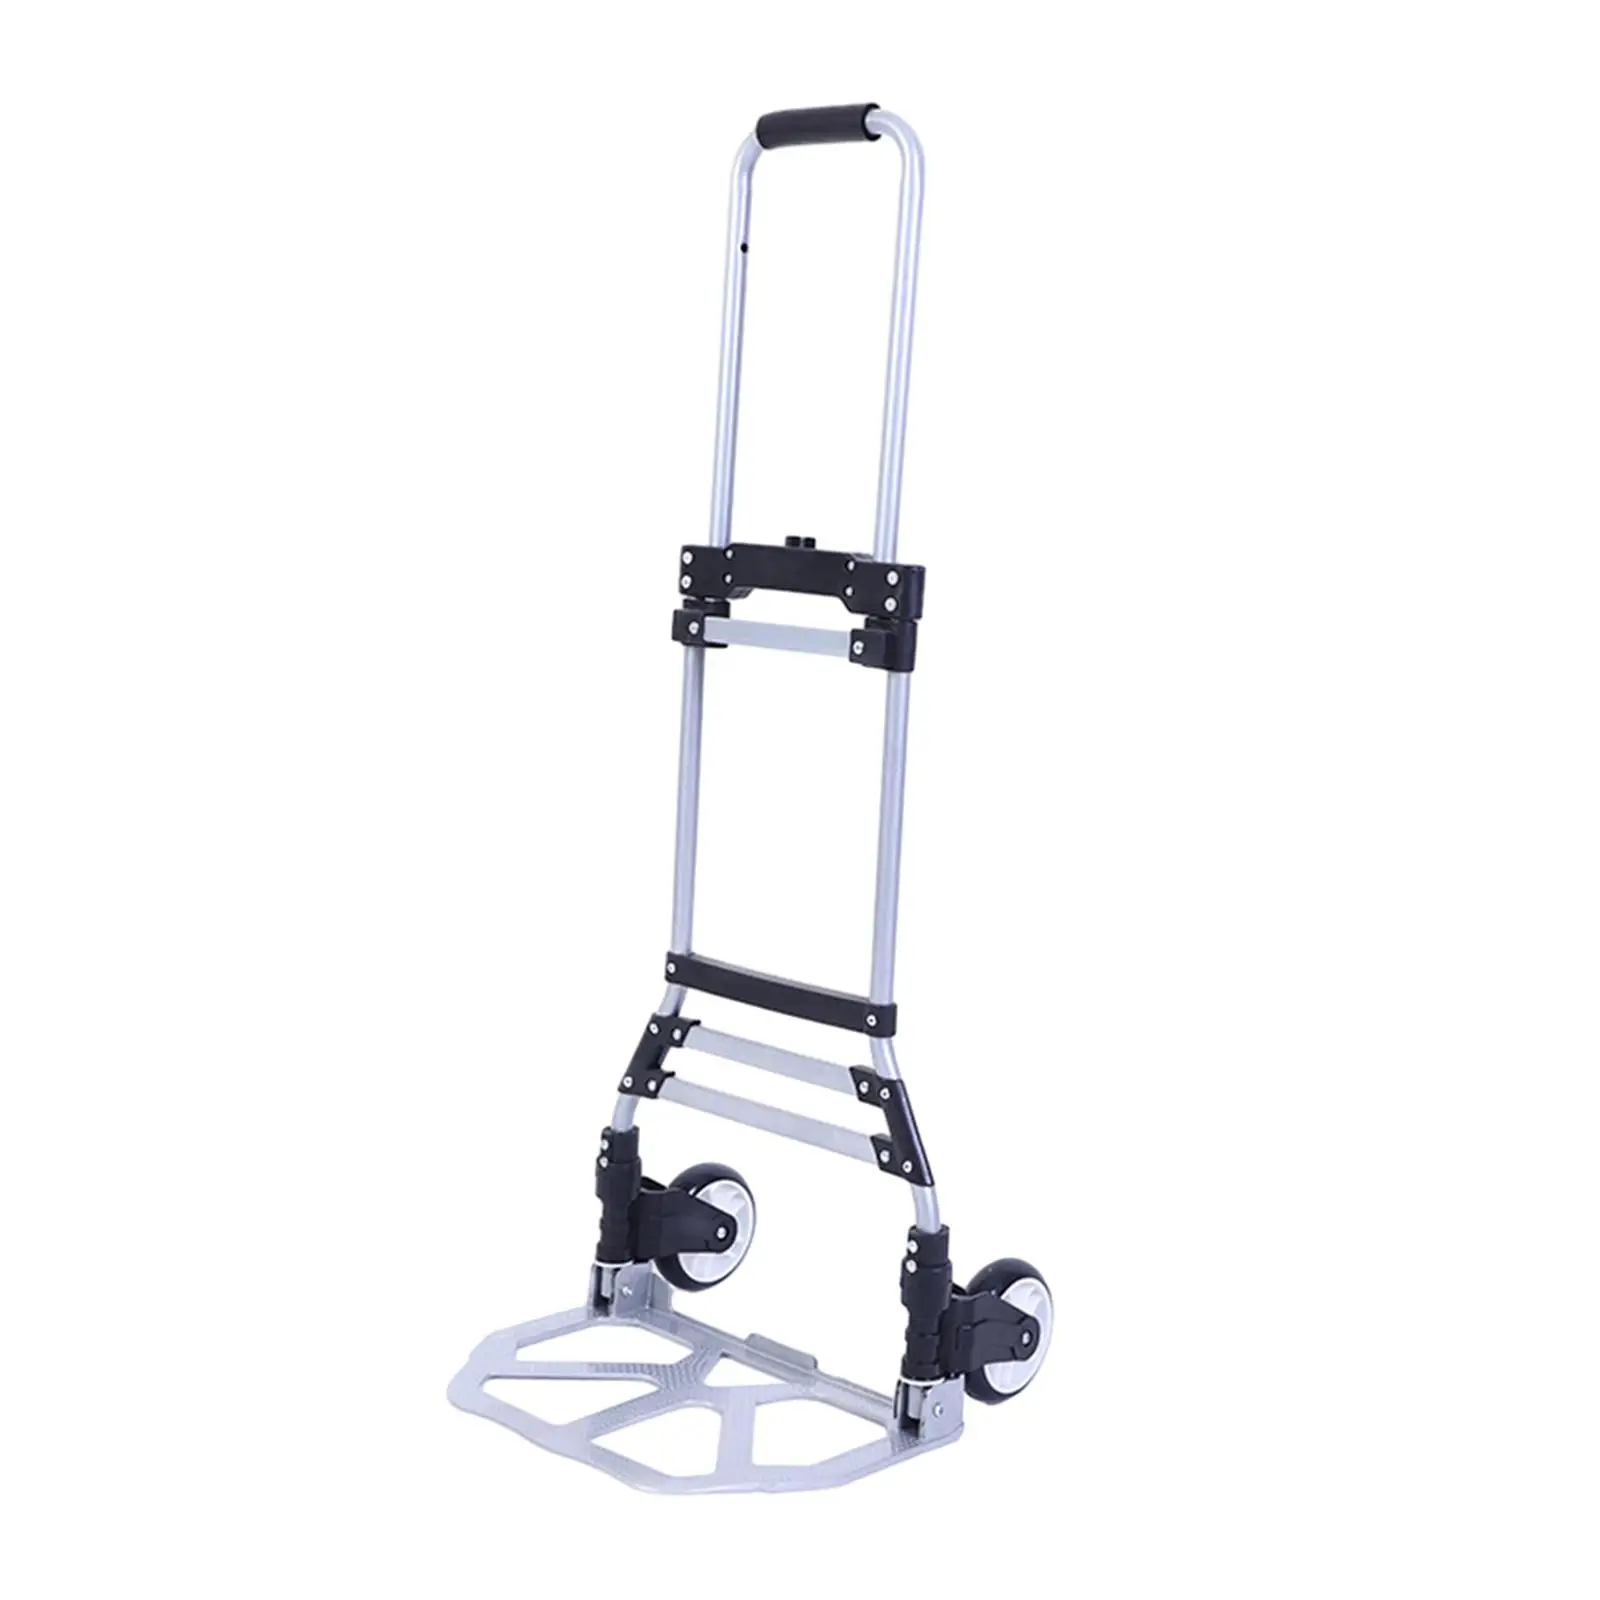 Foldable Hand Cart Portable Luggage Cart for Travel Household Transportation